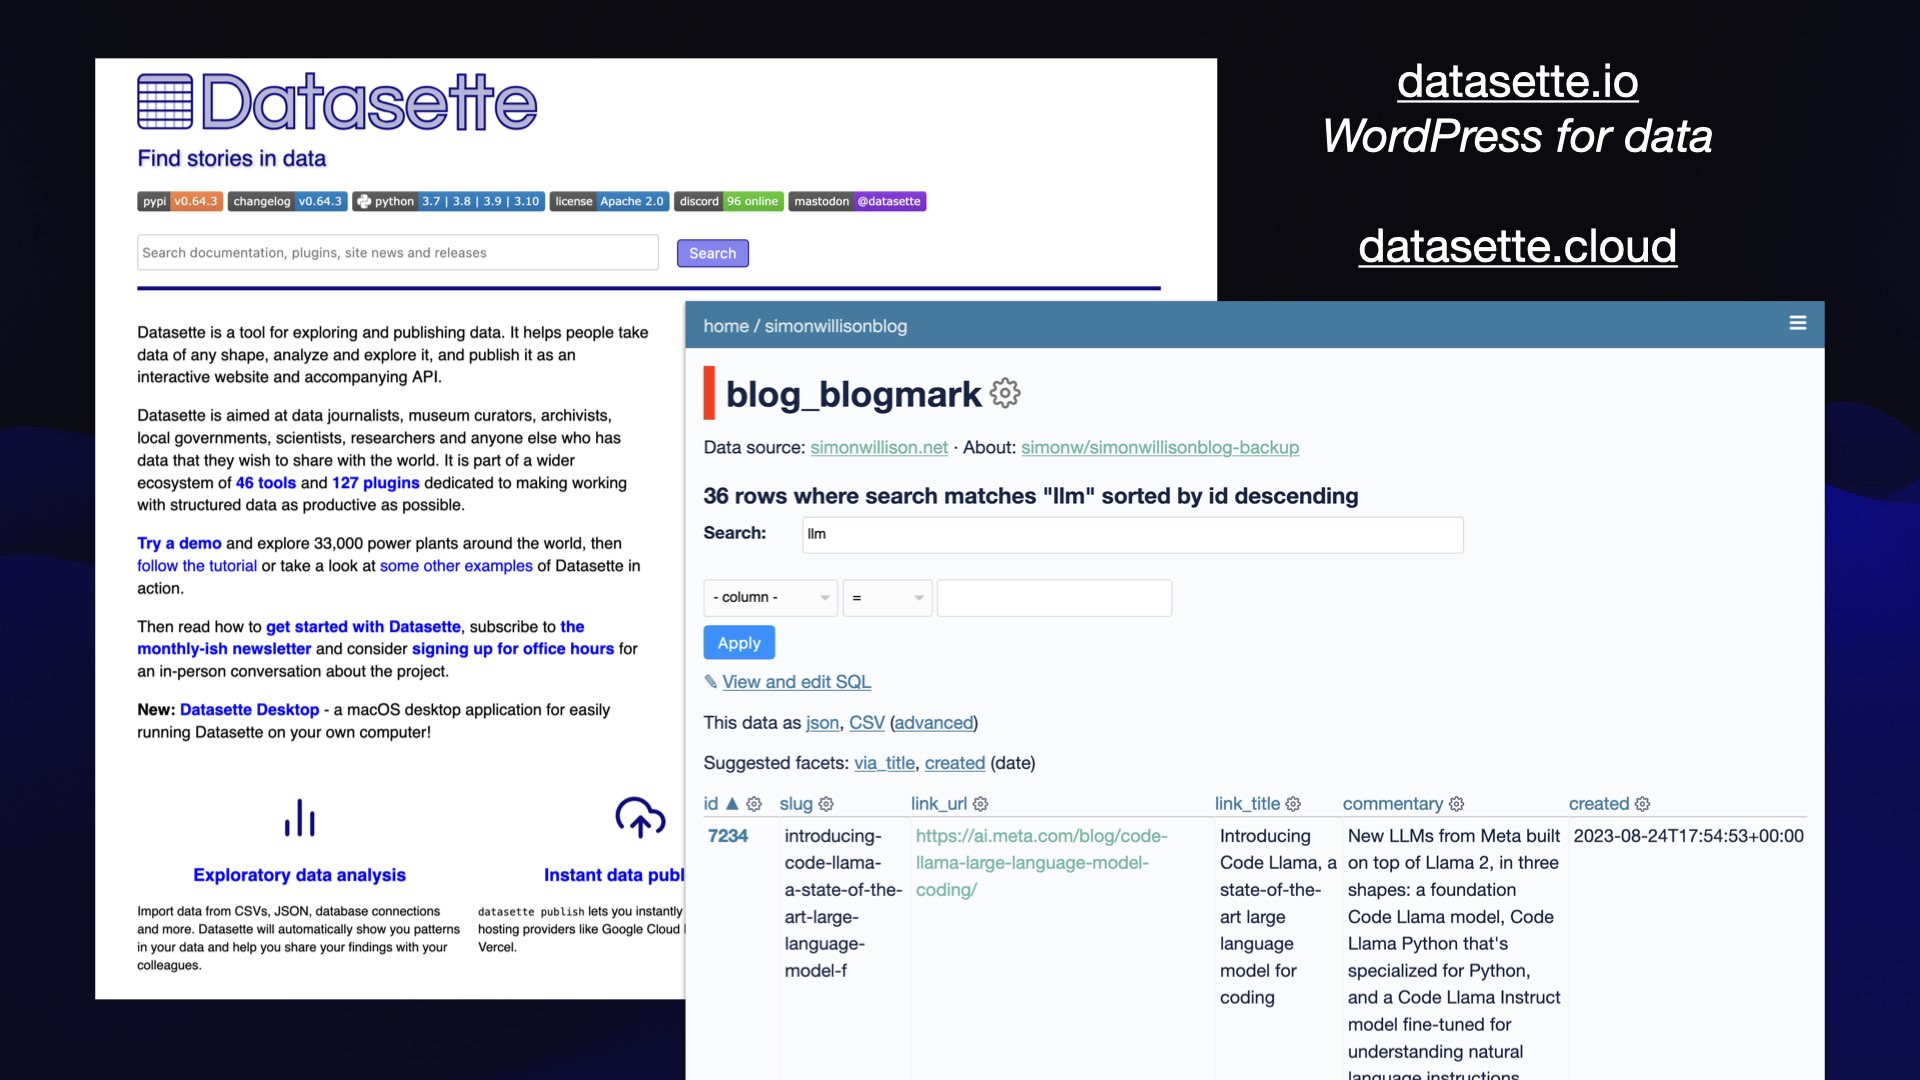 datasette.io - WordPress for Data - and datasette.cloud  Screenshot of the Datasette website, showing the tagline "Find stories in data".  And a screenshot of the Datasette interface, showing a table of blog_blogmark with a search filter searching for "llm". 36 matches.